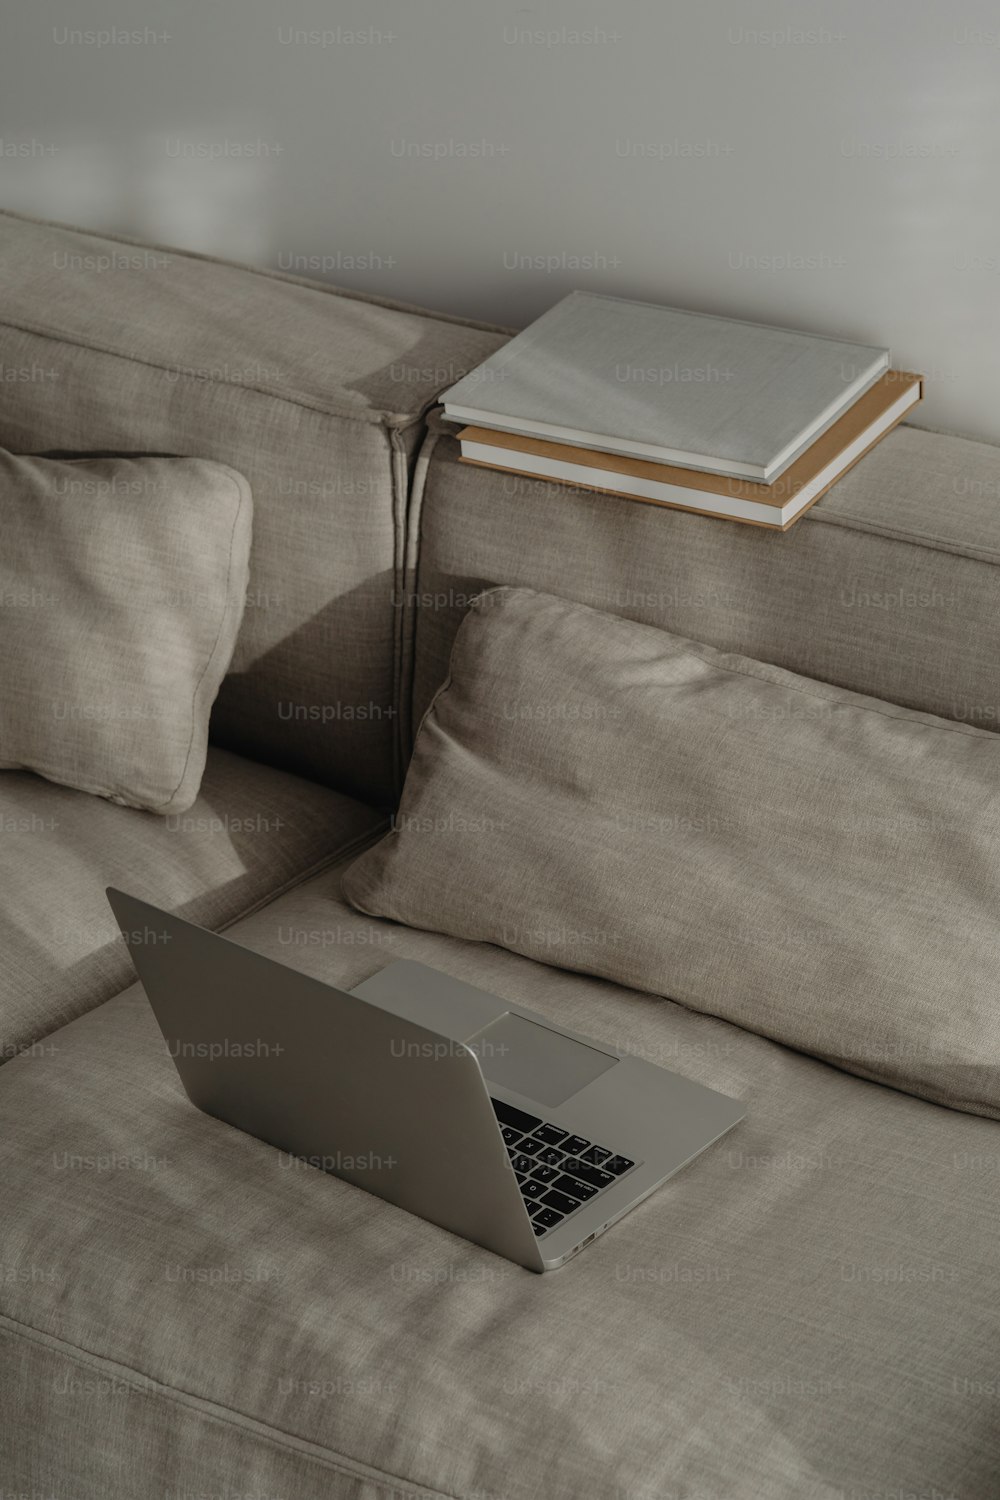 a laptop computer sitting on top of a couch